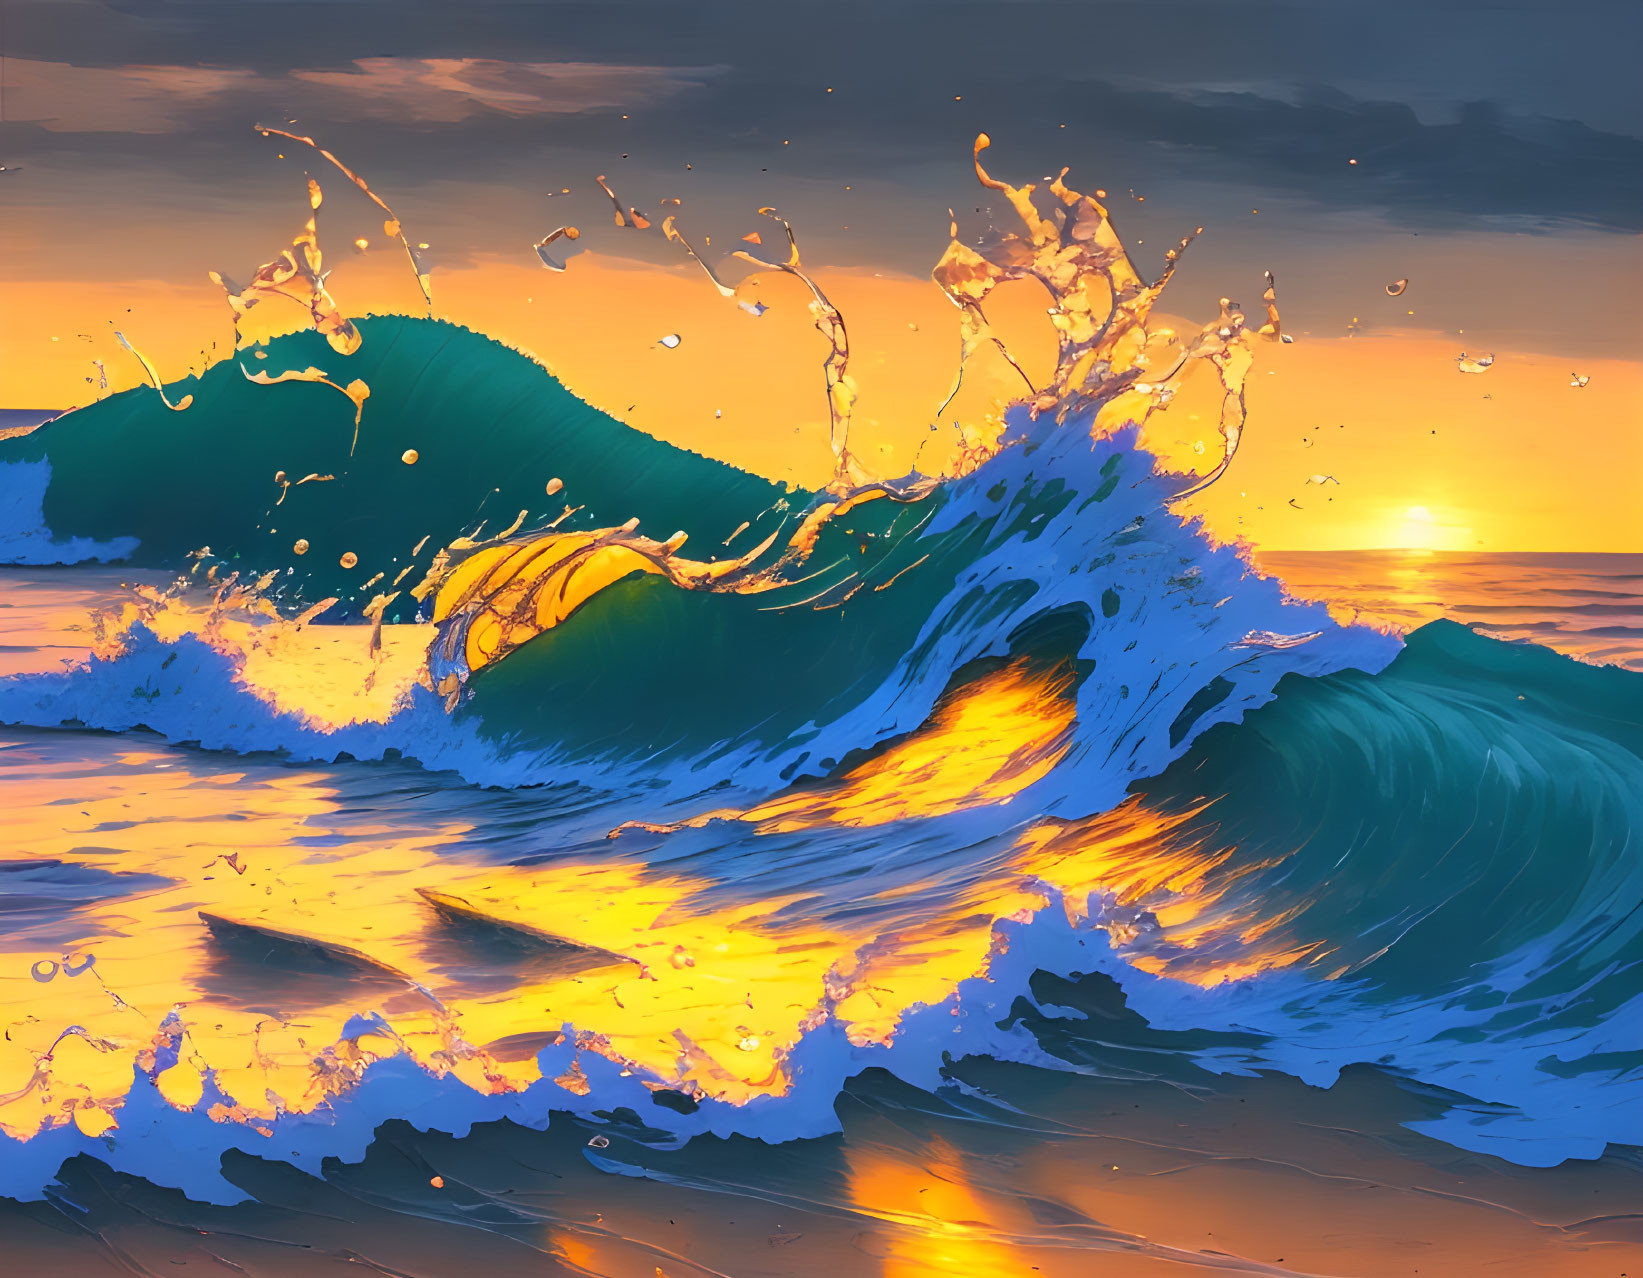 Vibrant ocean sunset scene with crashing waves and fiery reflections